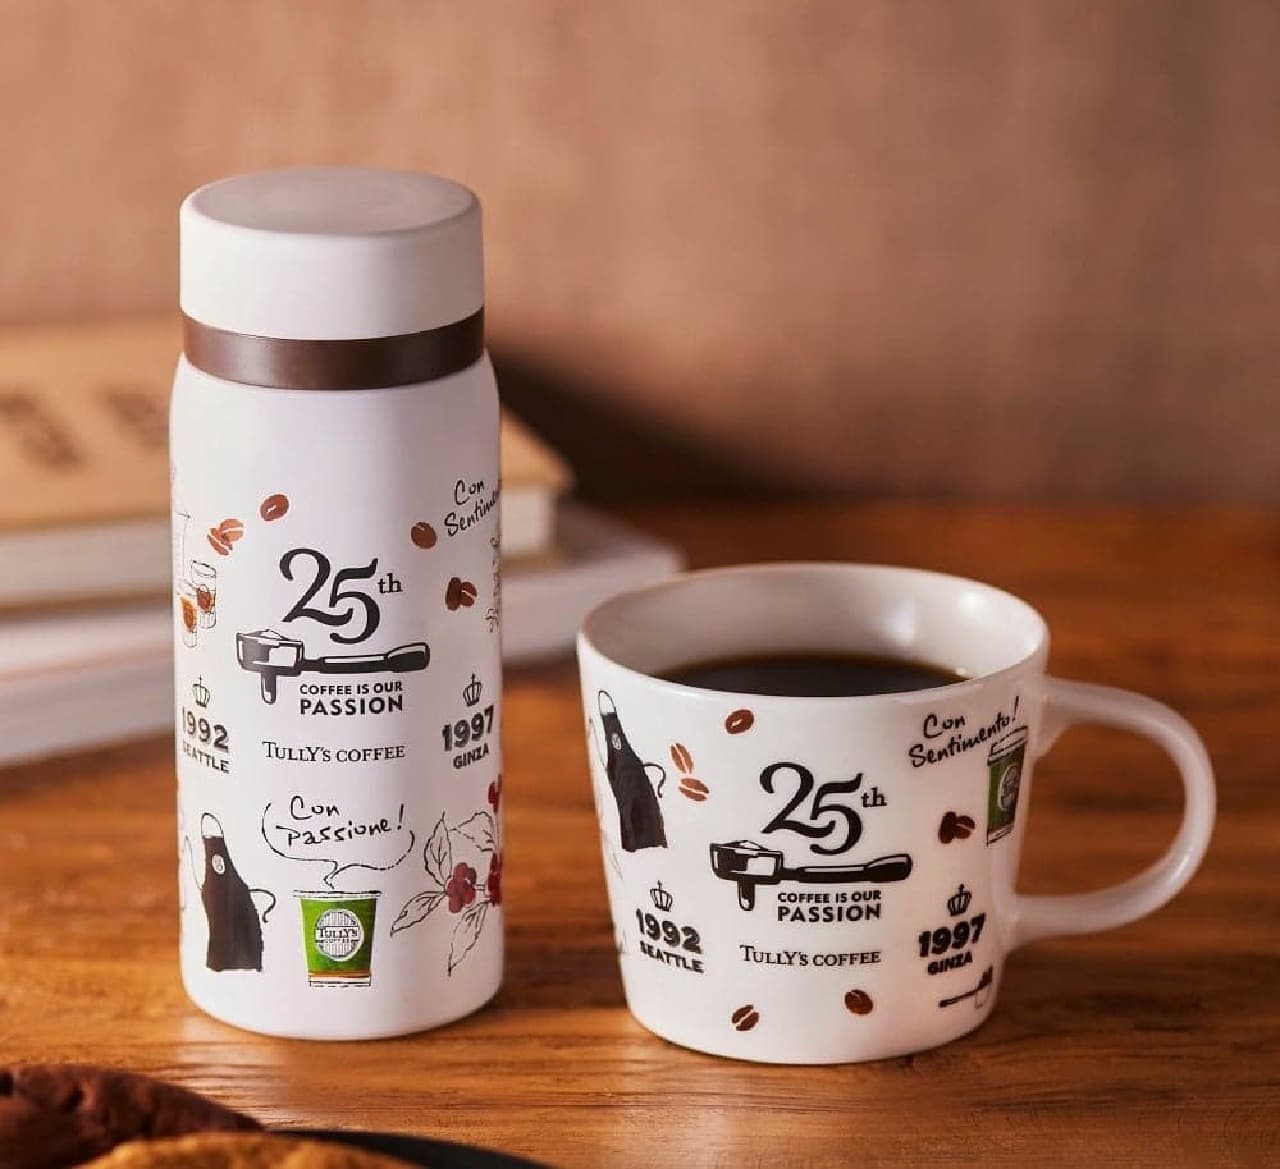 Tully's "25th Anniversary Stainless Steel Bottle" and "25th Anniversary Mug